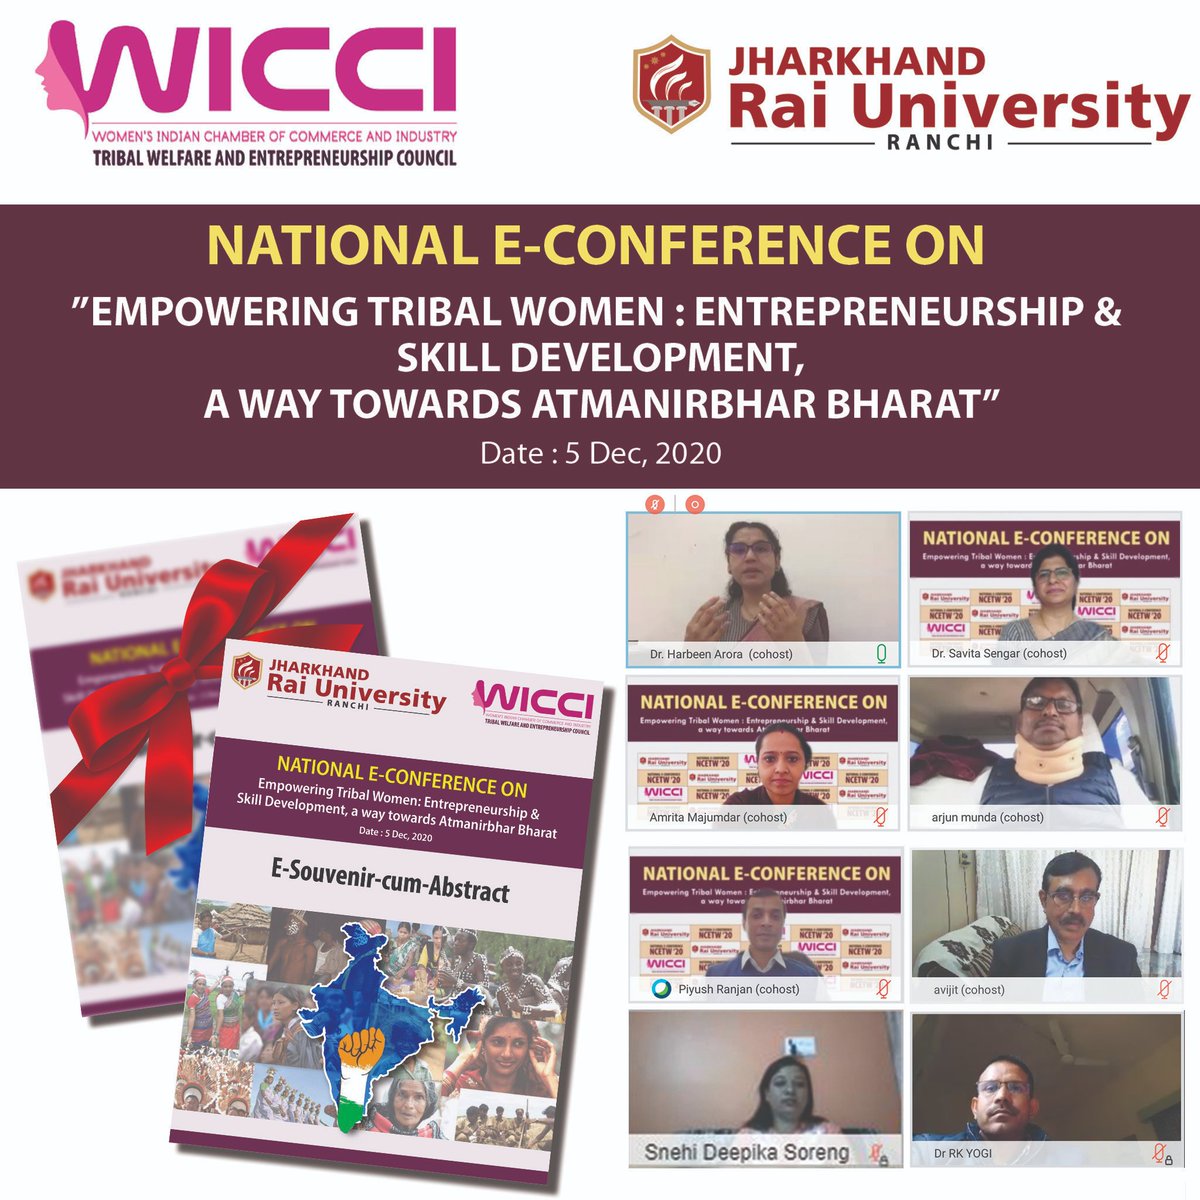 @WicciTribal, part of @wicciindia proudly launches #TribalTreasures - a unique initiative promoting forgotten gems from tribal culture #empoweringwomen supported by @JhRaiUniv @harbeenarora @TribalAffairsIn